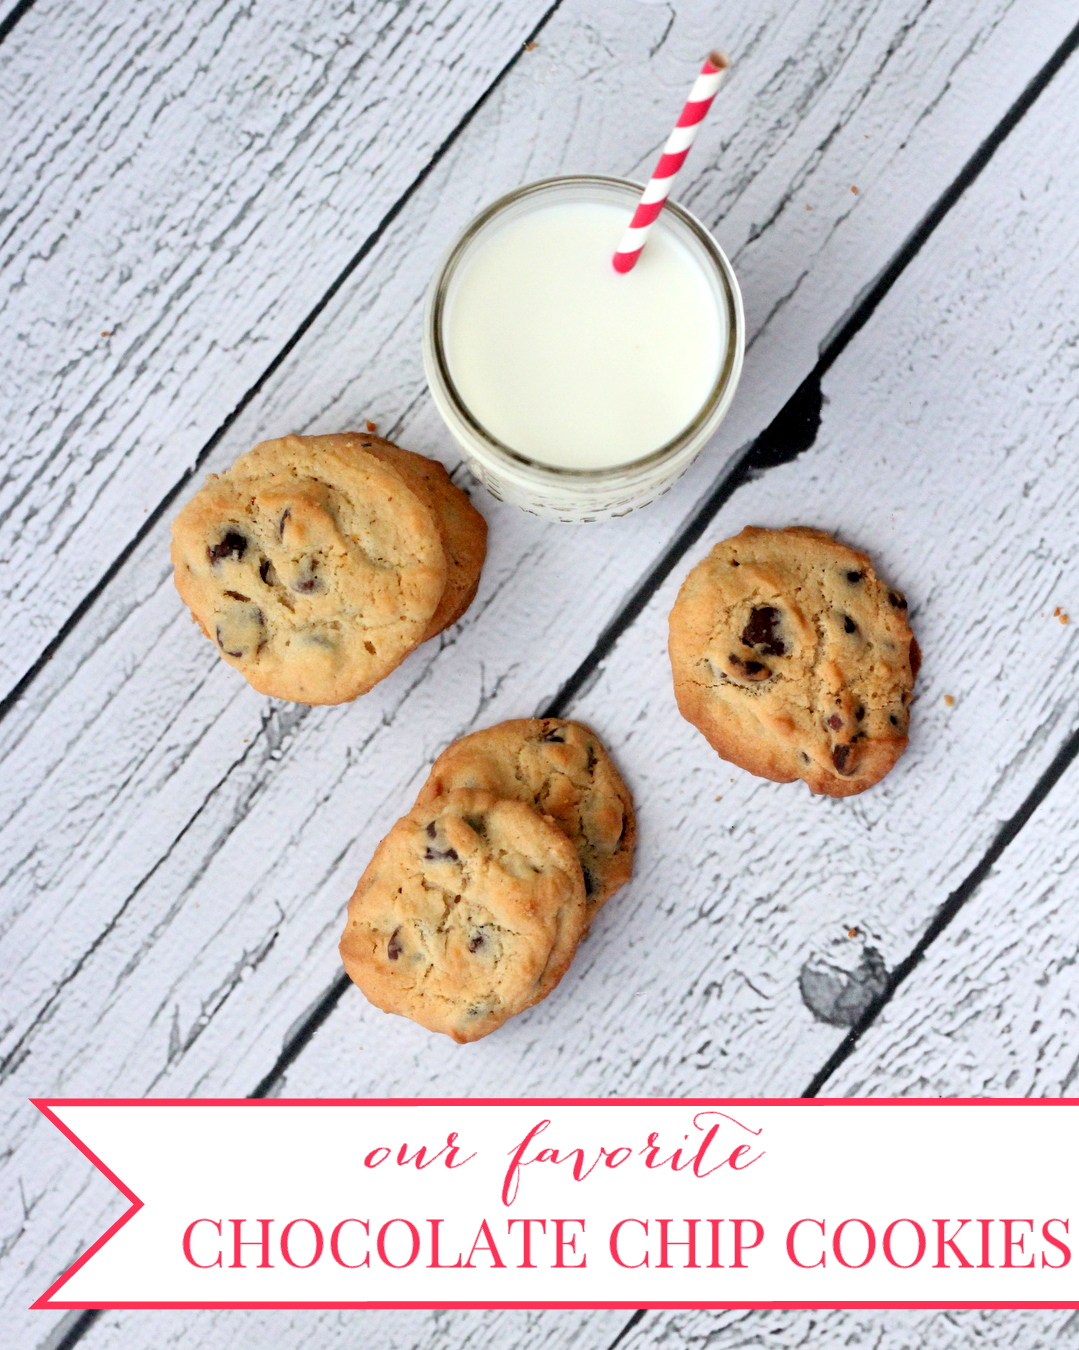 our favorite chocolate chip cookies recipe- these are perfection!